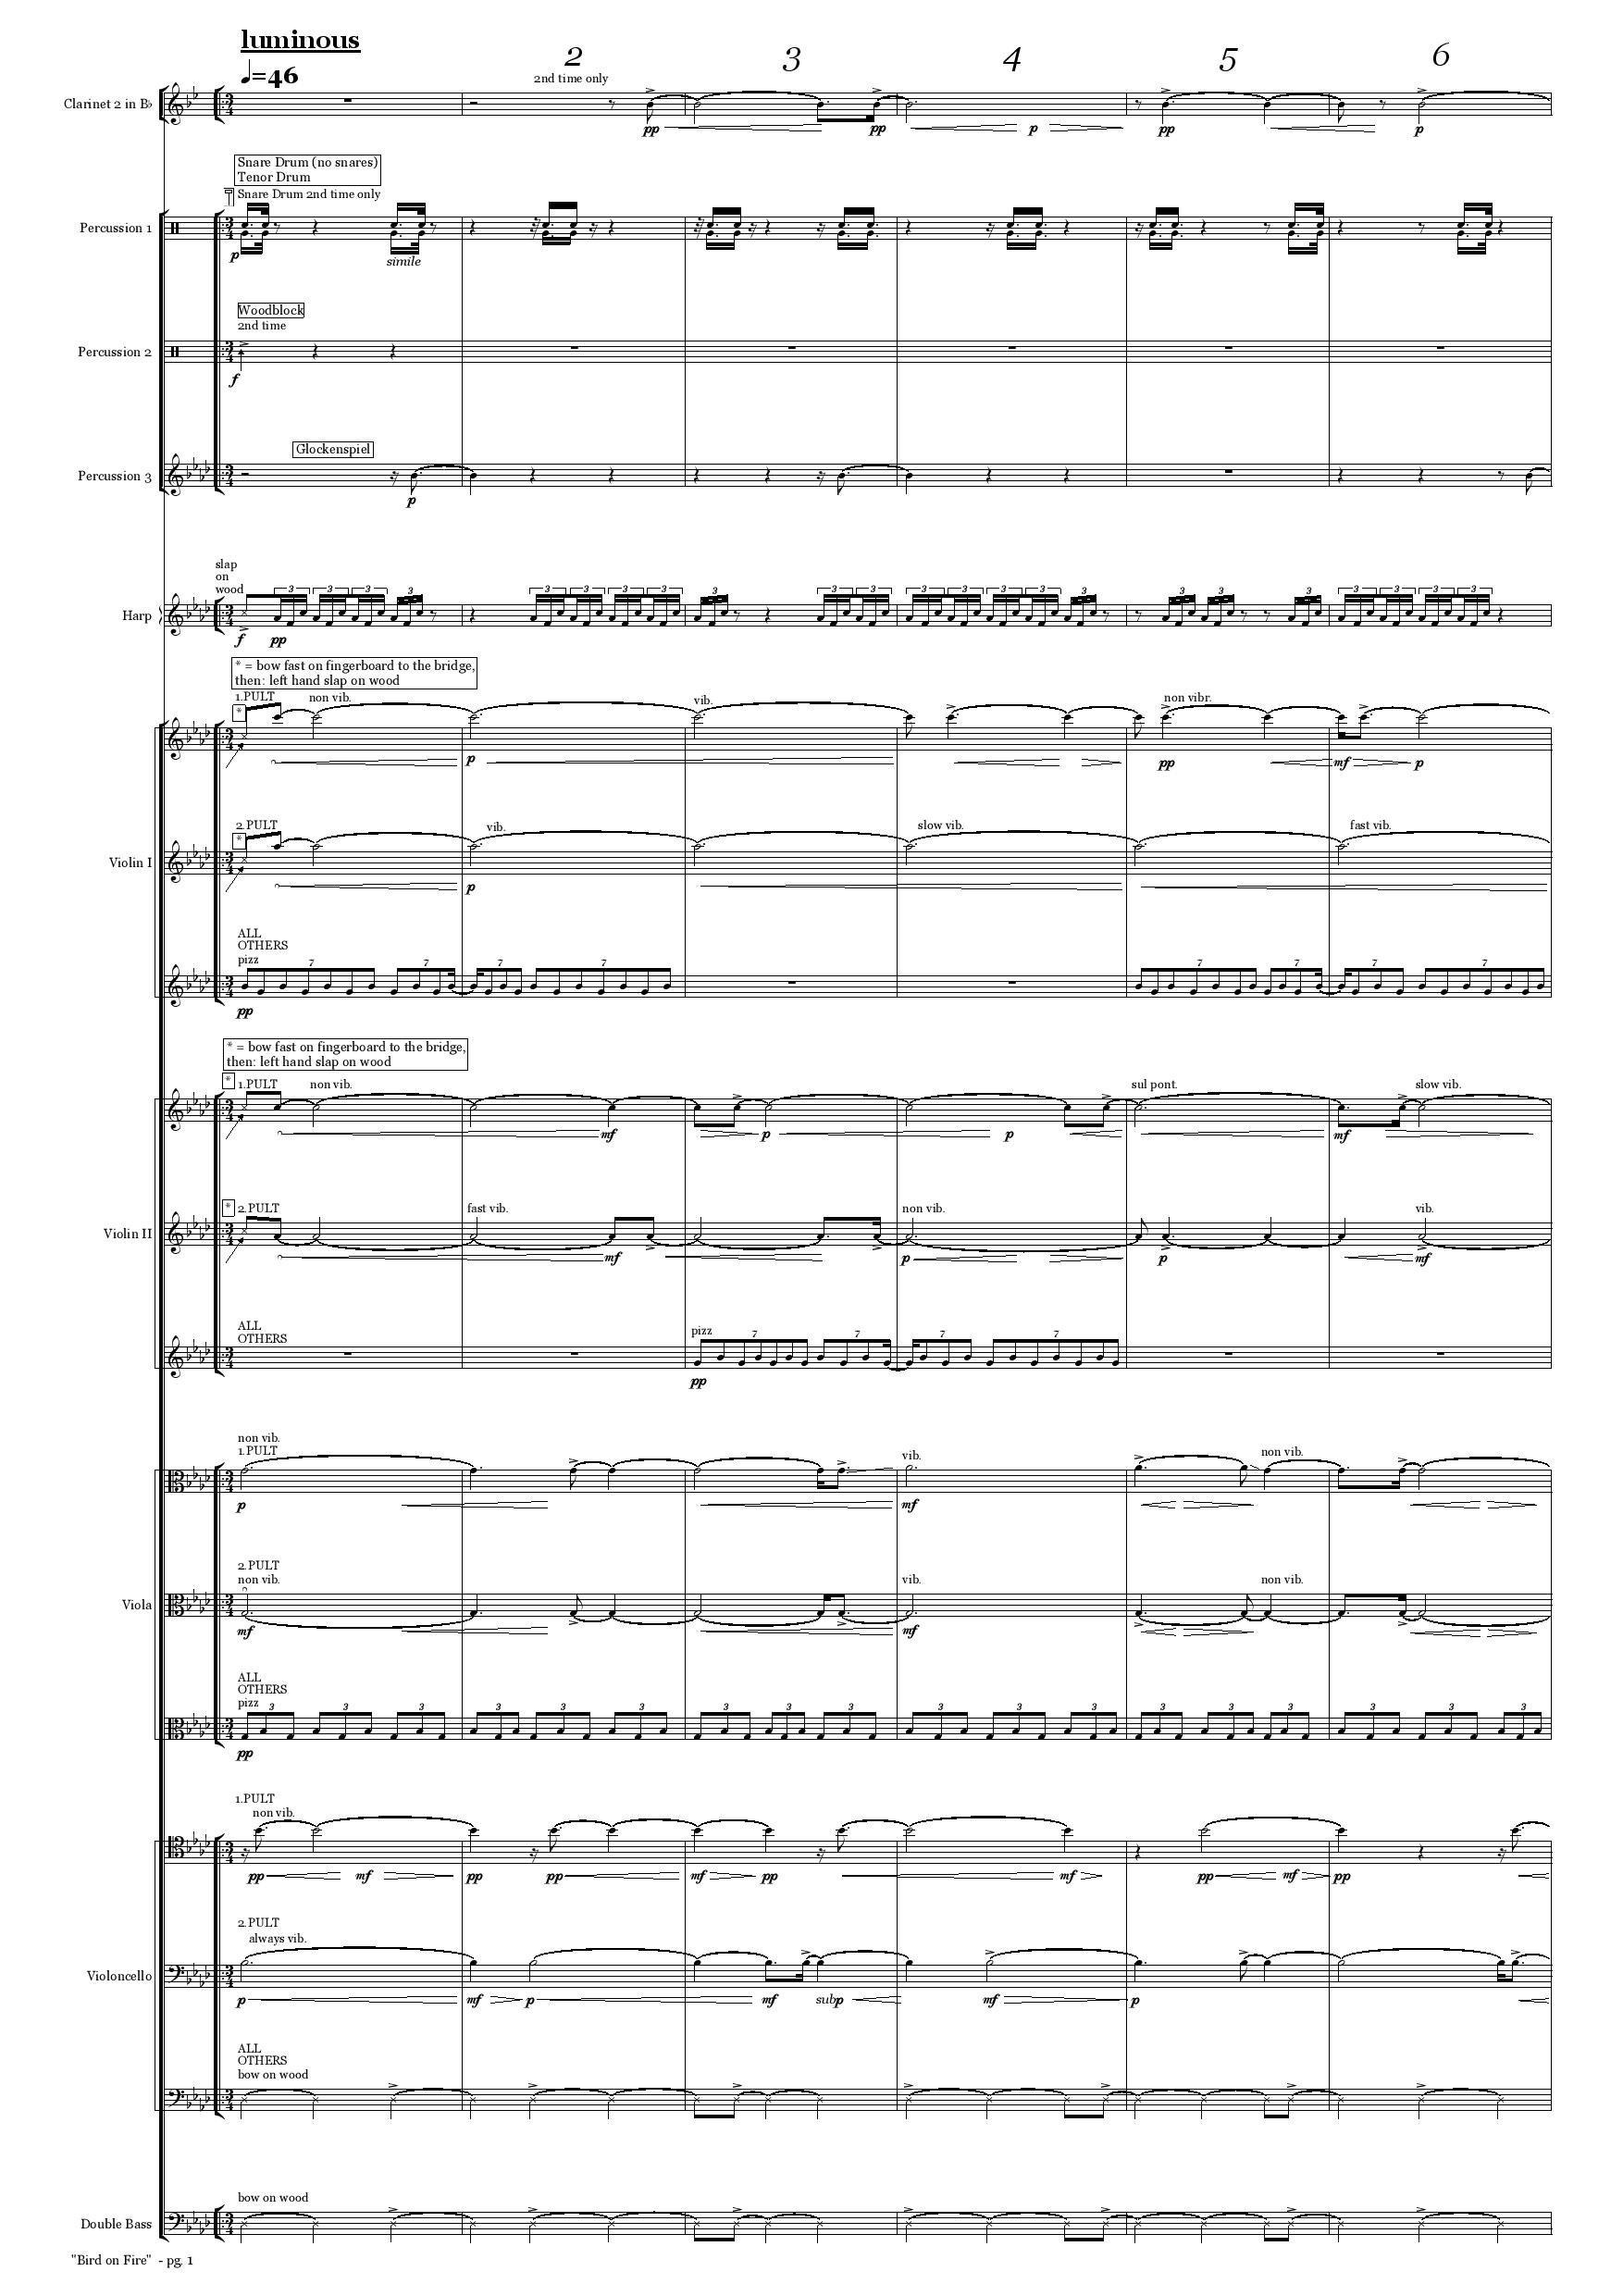 SCORE EXCERPTS (to request full score, please send an email)